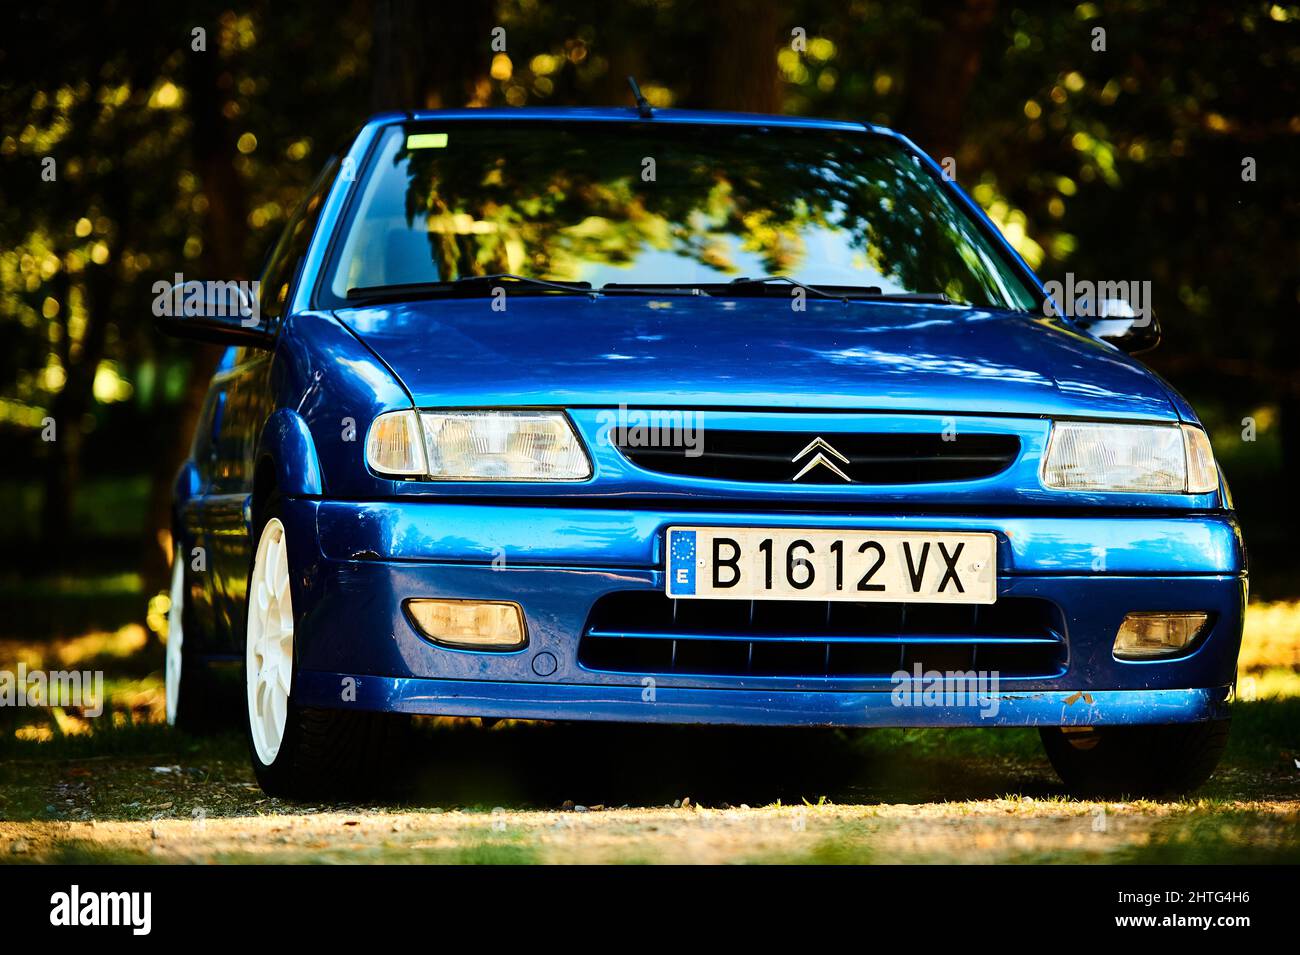 Closeup of a blue Citroen Saxo Vts with trees on the background Stock Photo